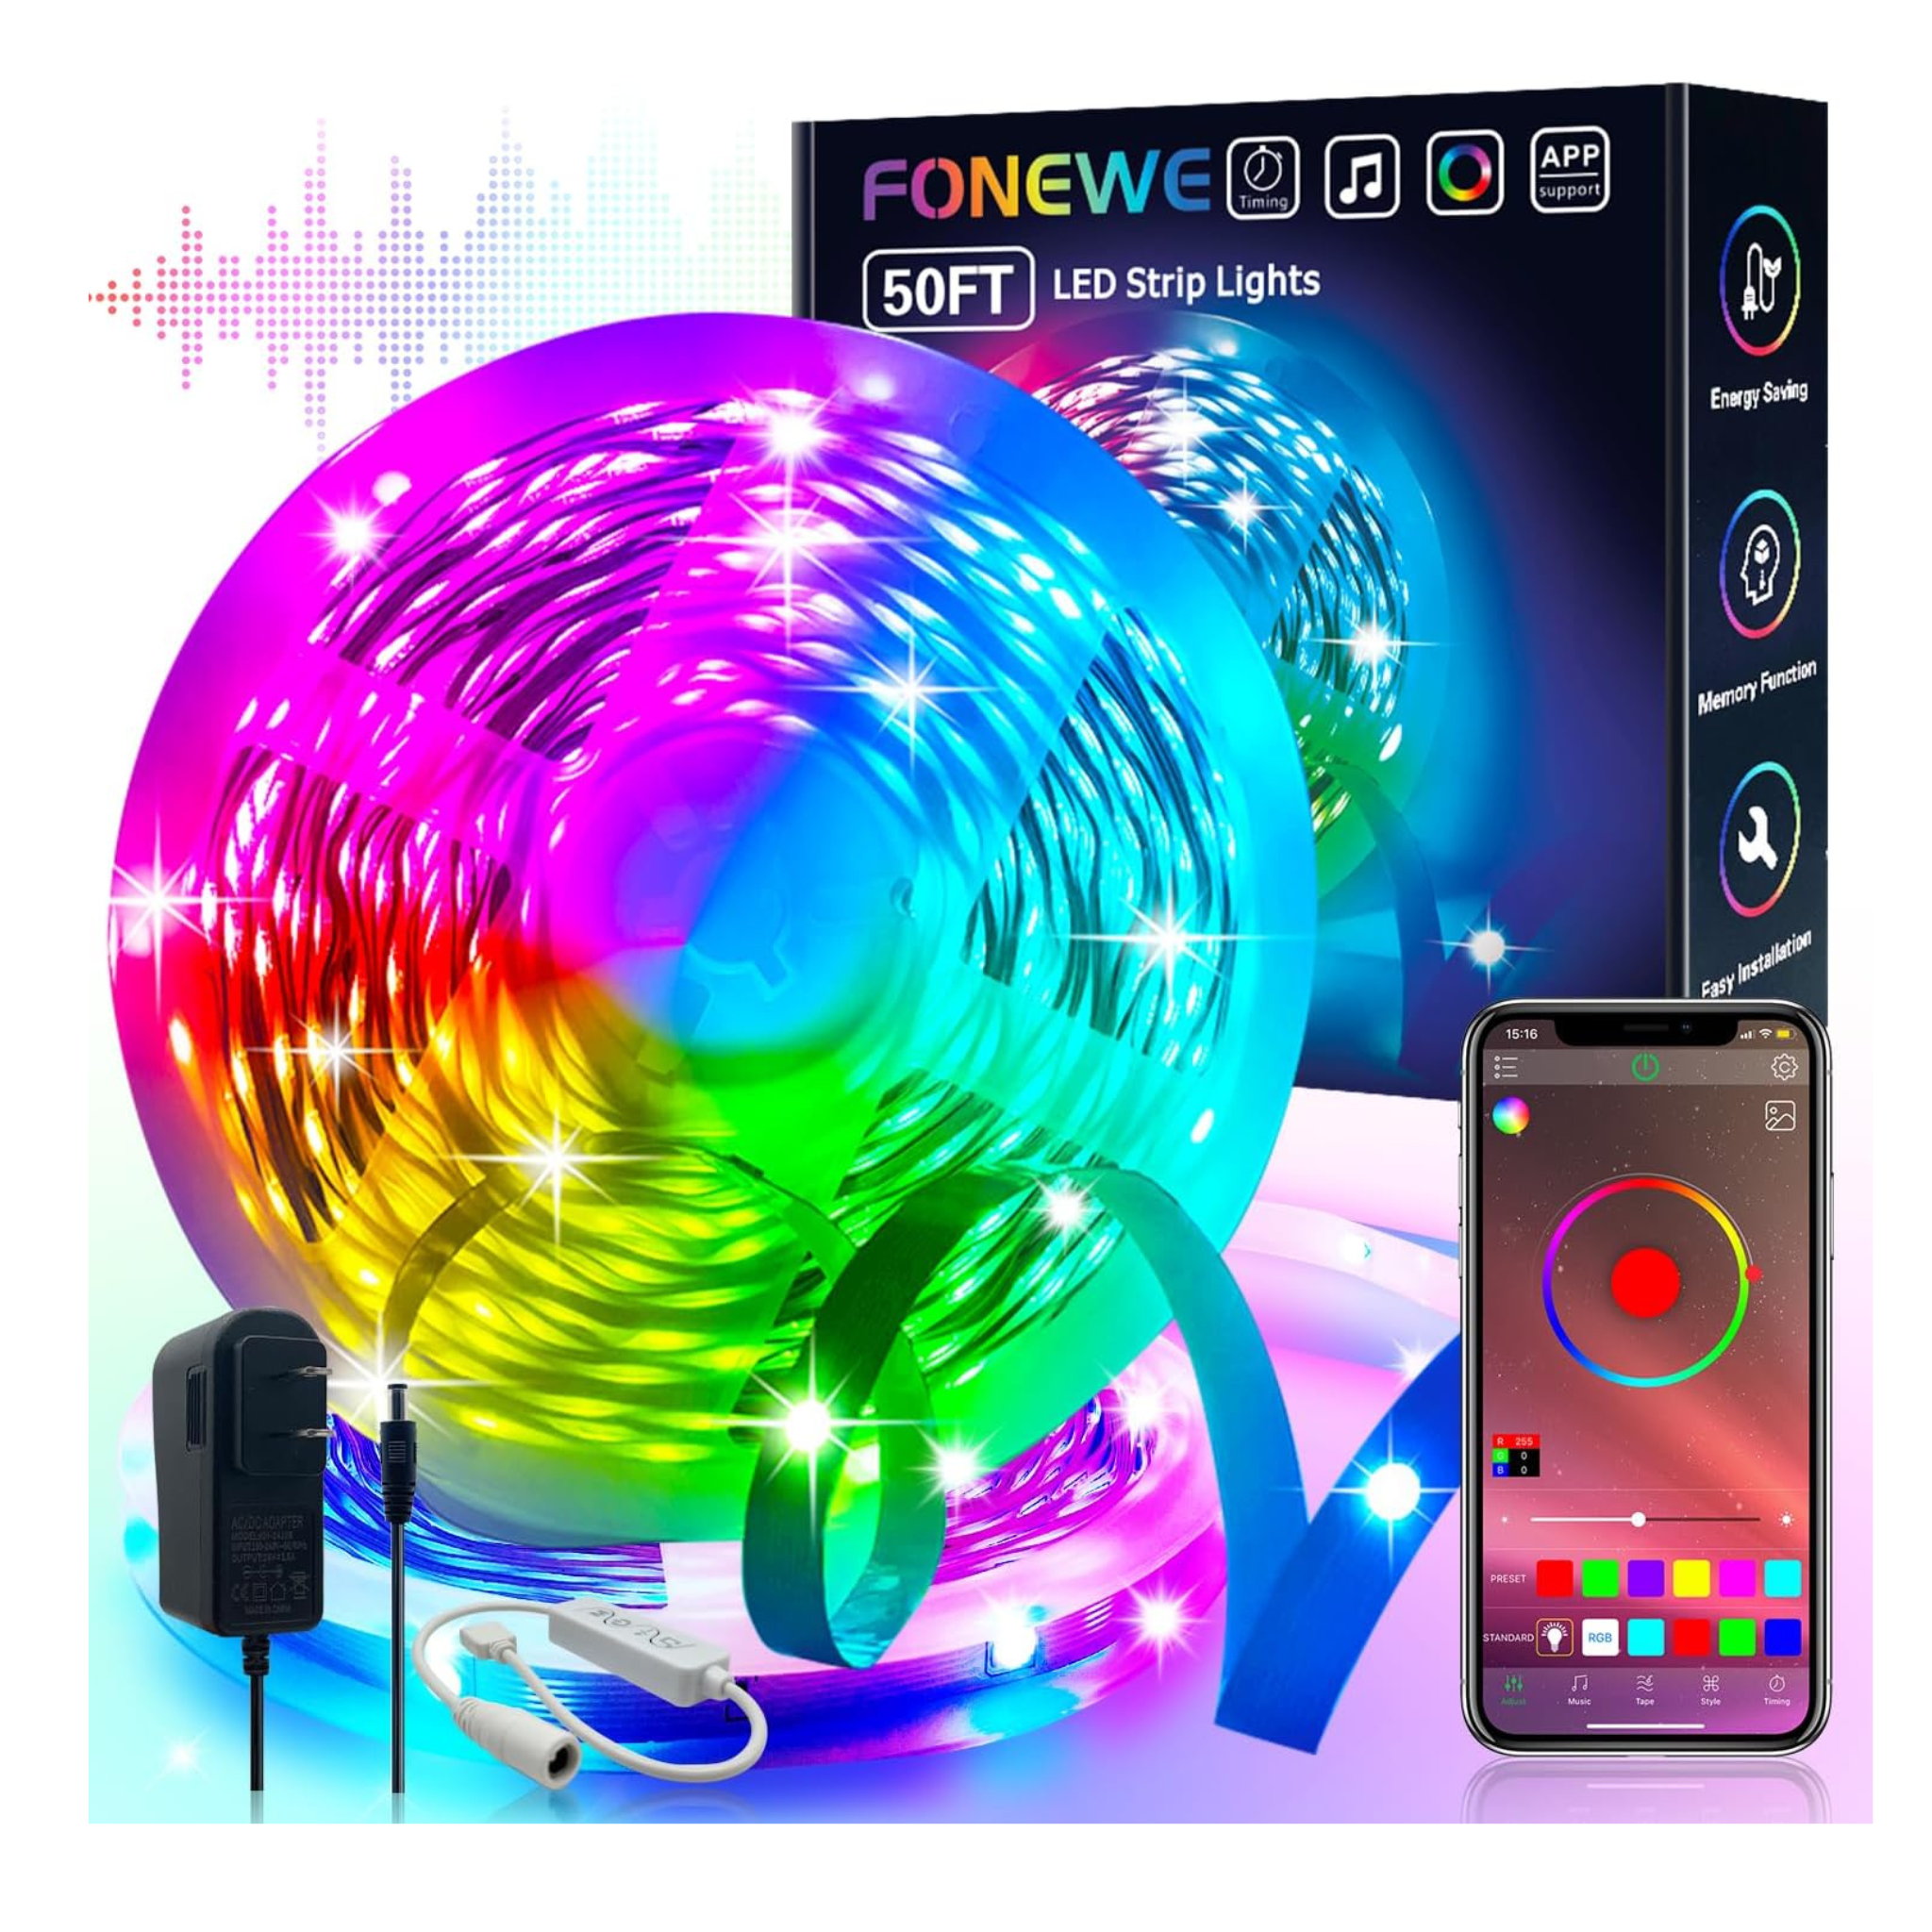 Fonewe 50ft LED Light Strip with App